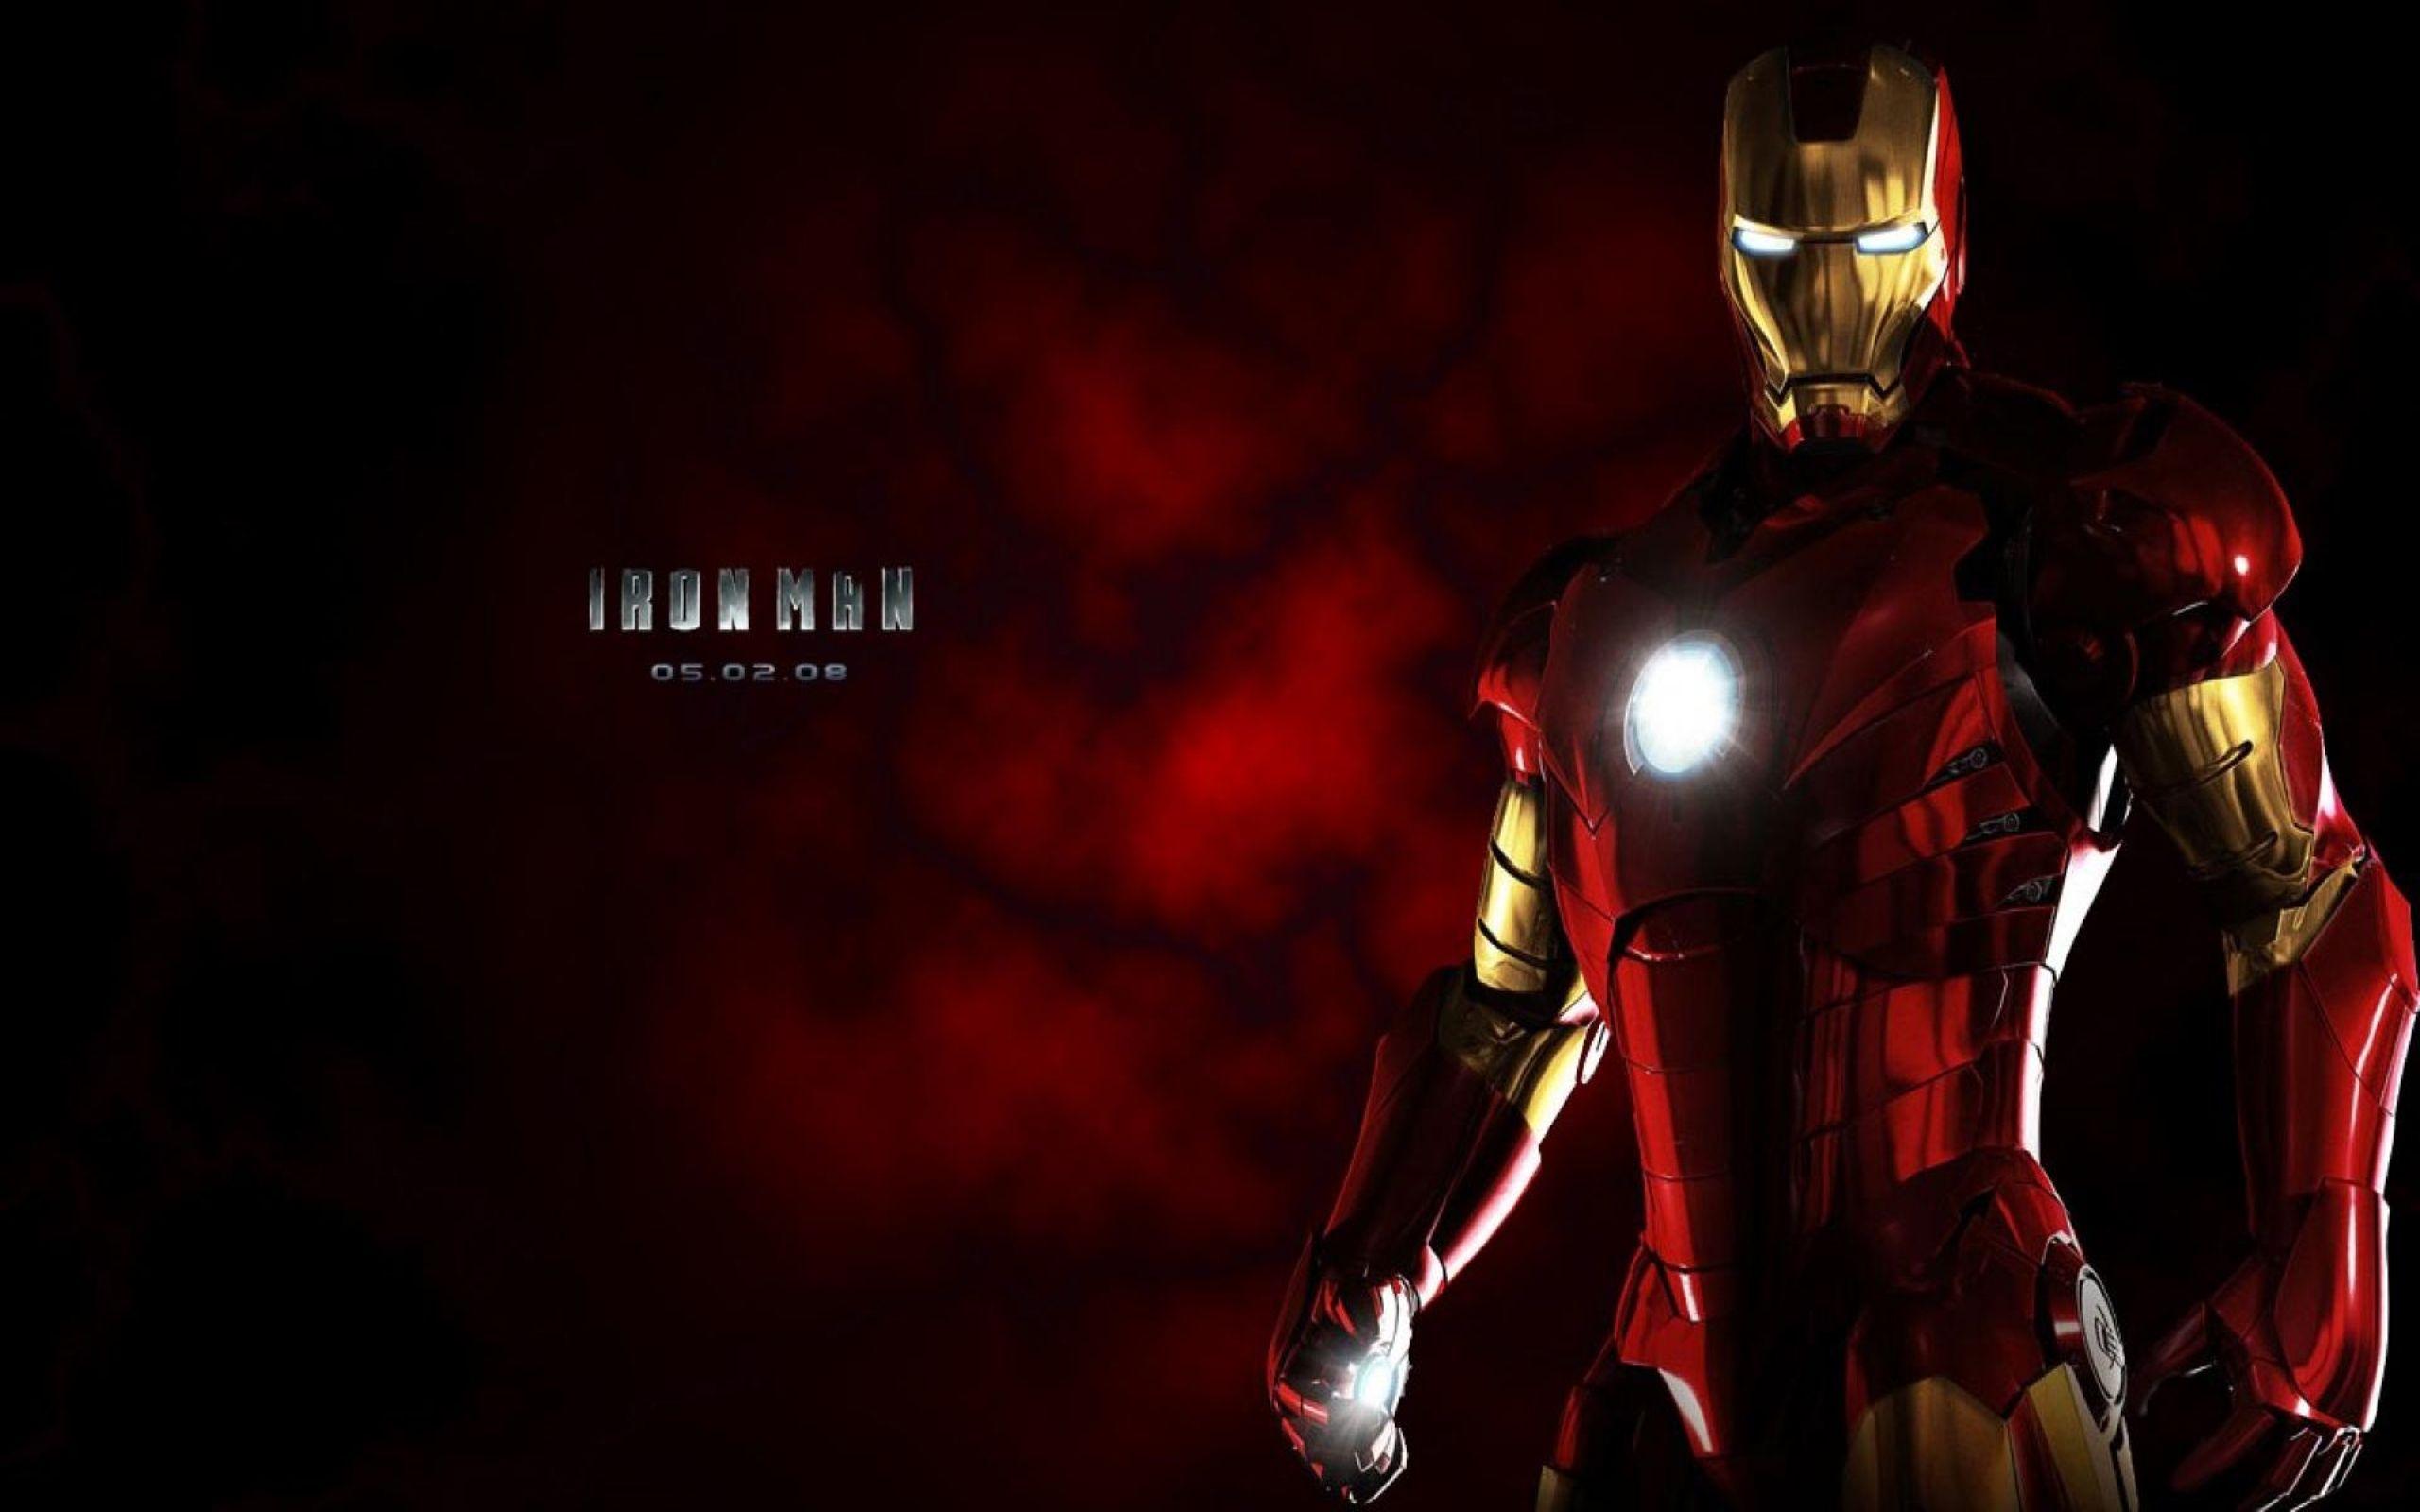 entries in Iron Man HD Wallpaper 1080p group